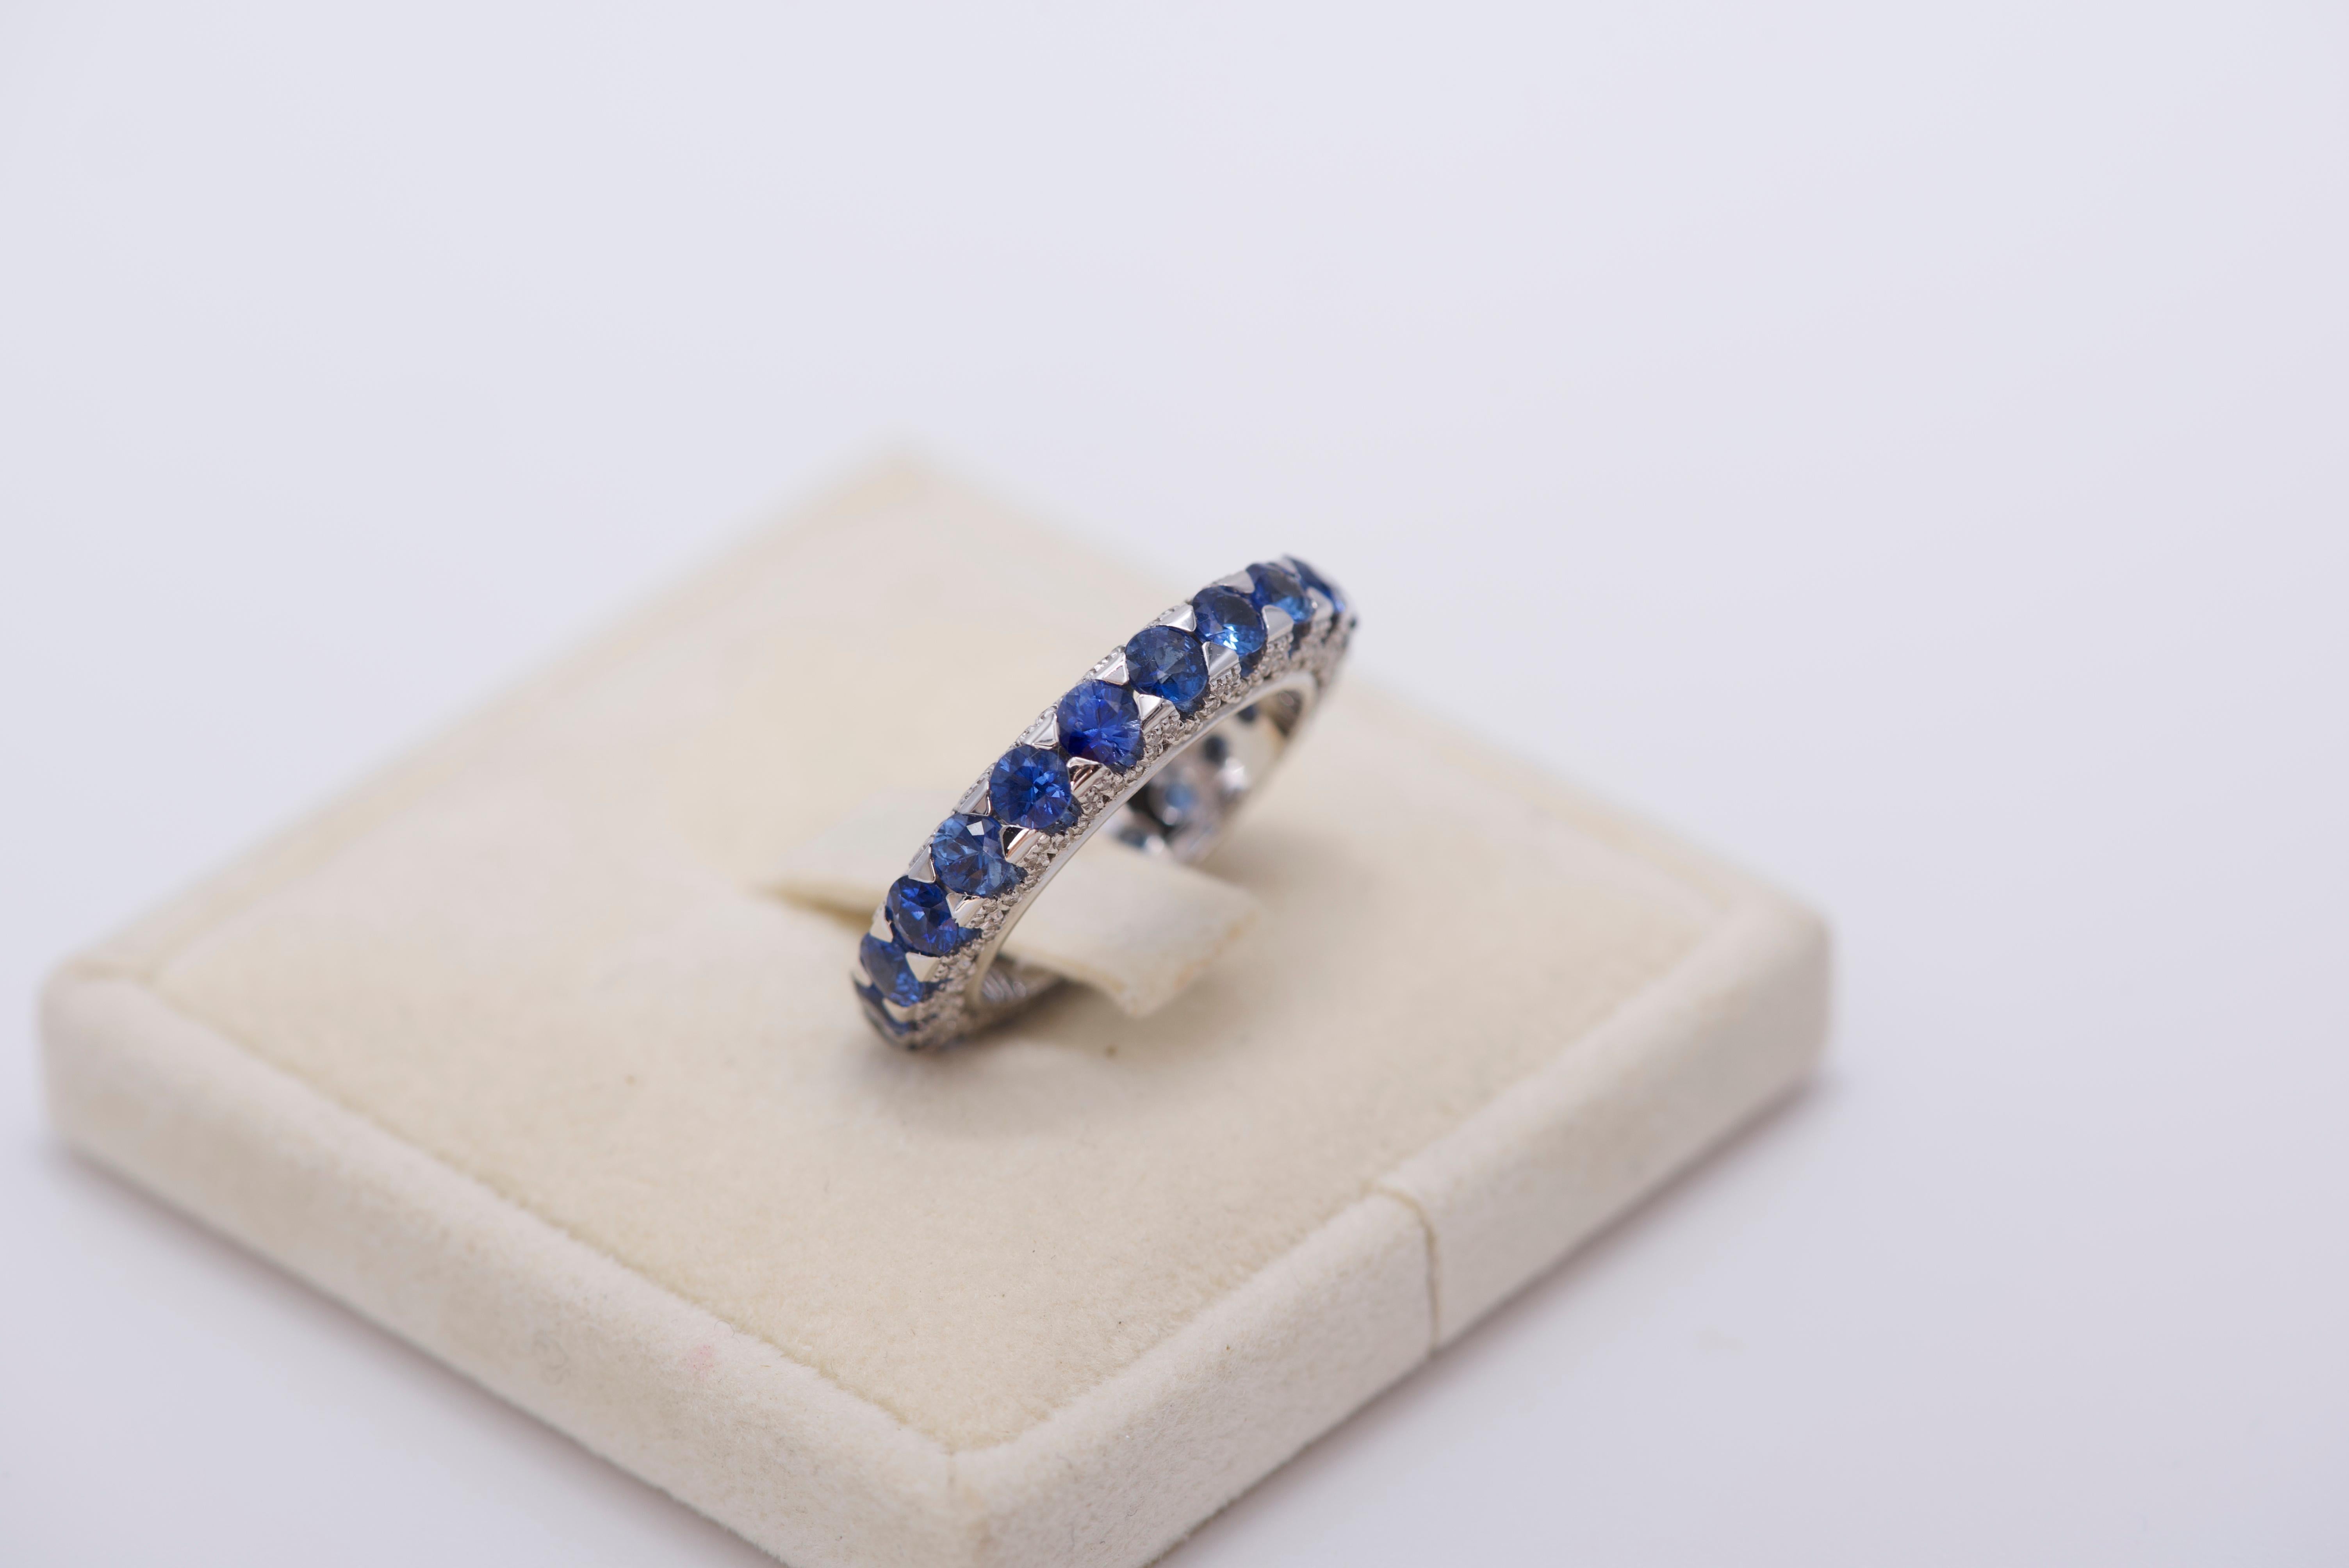 Band ring in 18K white gold (approx. 5.6g) with white diamonds (approx. 0.36cts) and blue sapphires (approx. 3.42 carats).